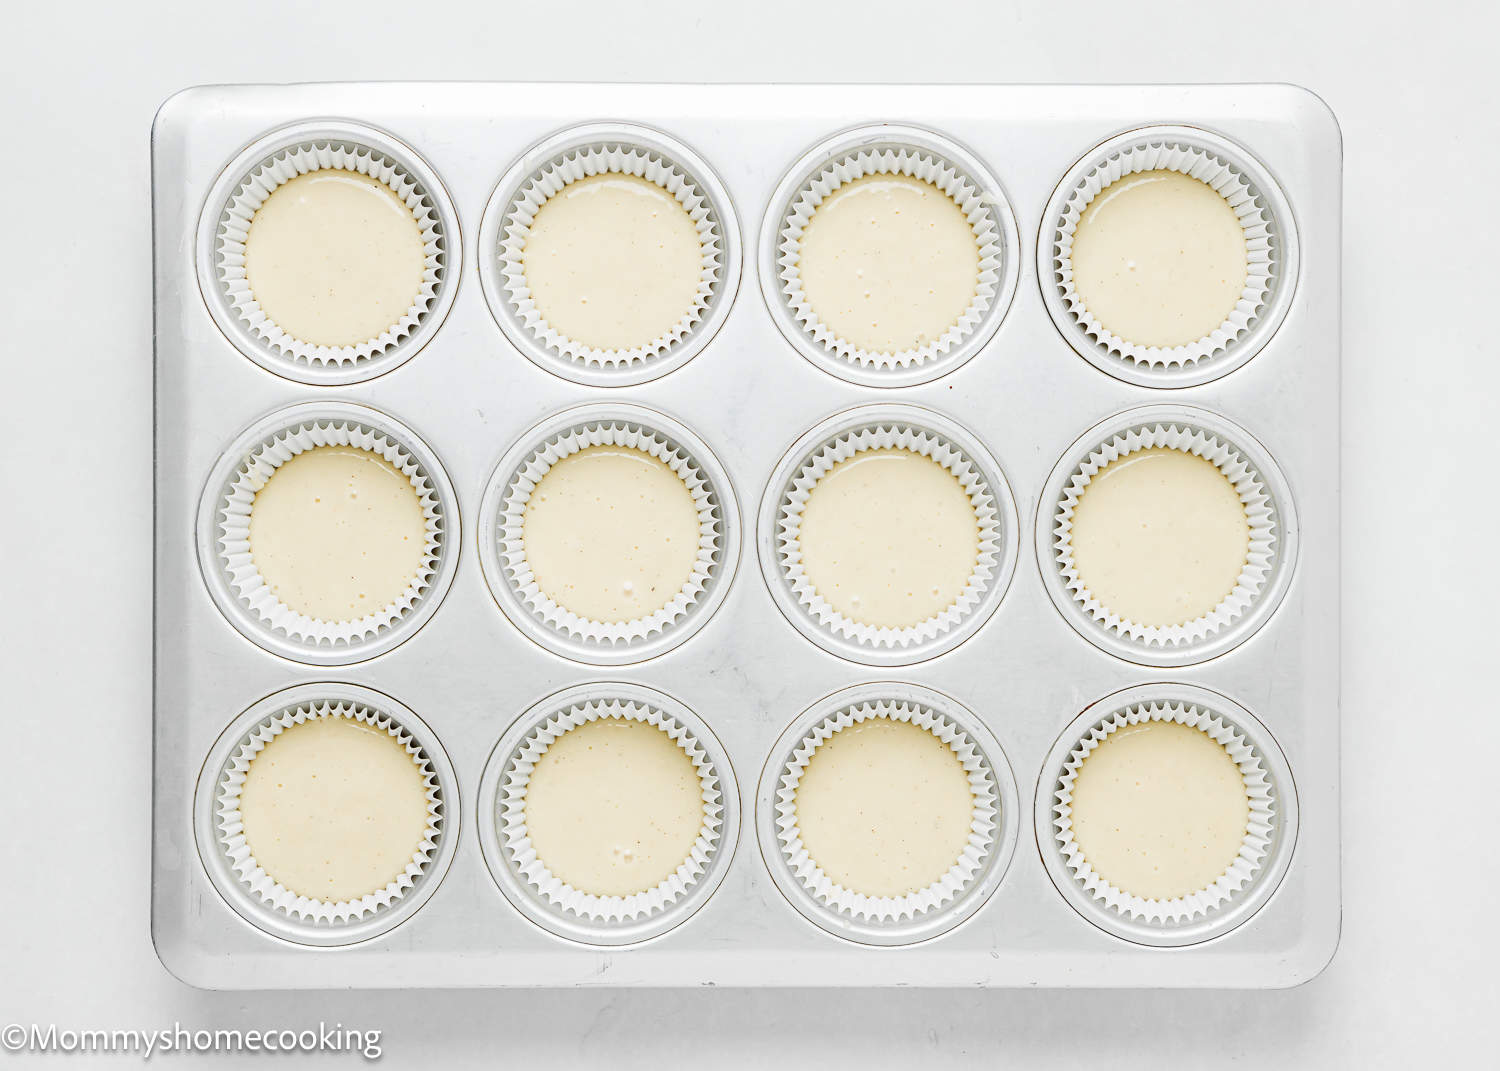 unbaked baked dairy-free and egg-free Vanilla Cupcake batter in a cupcake pan.